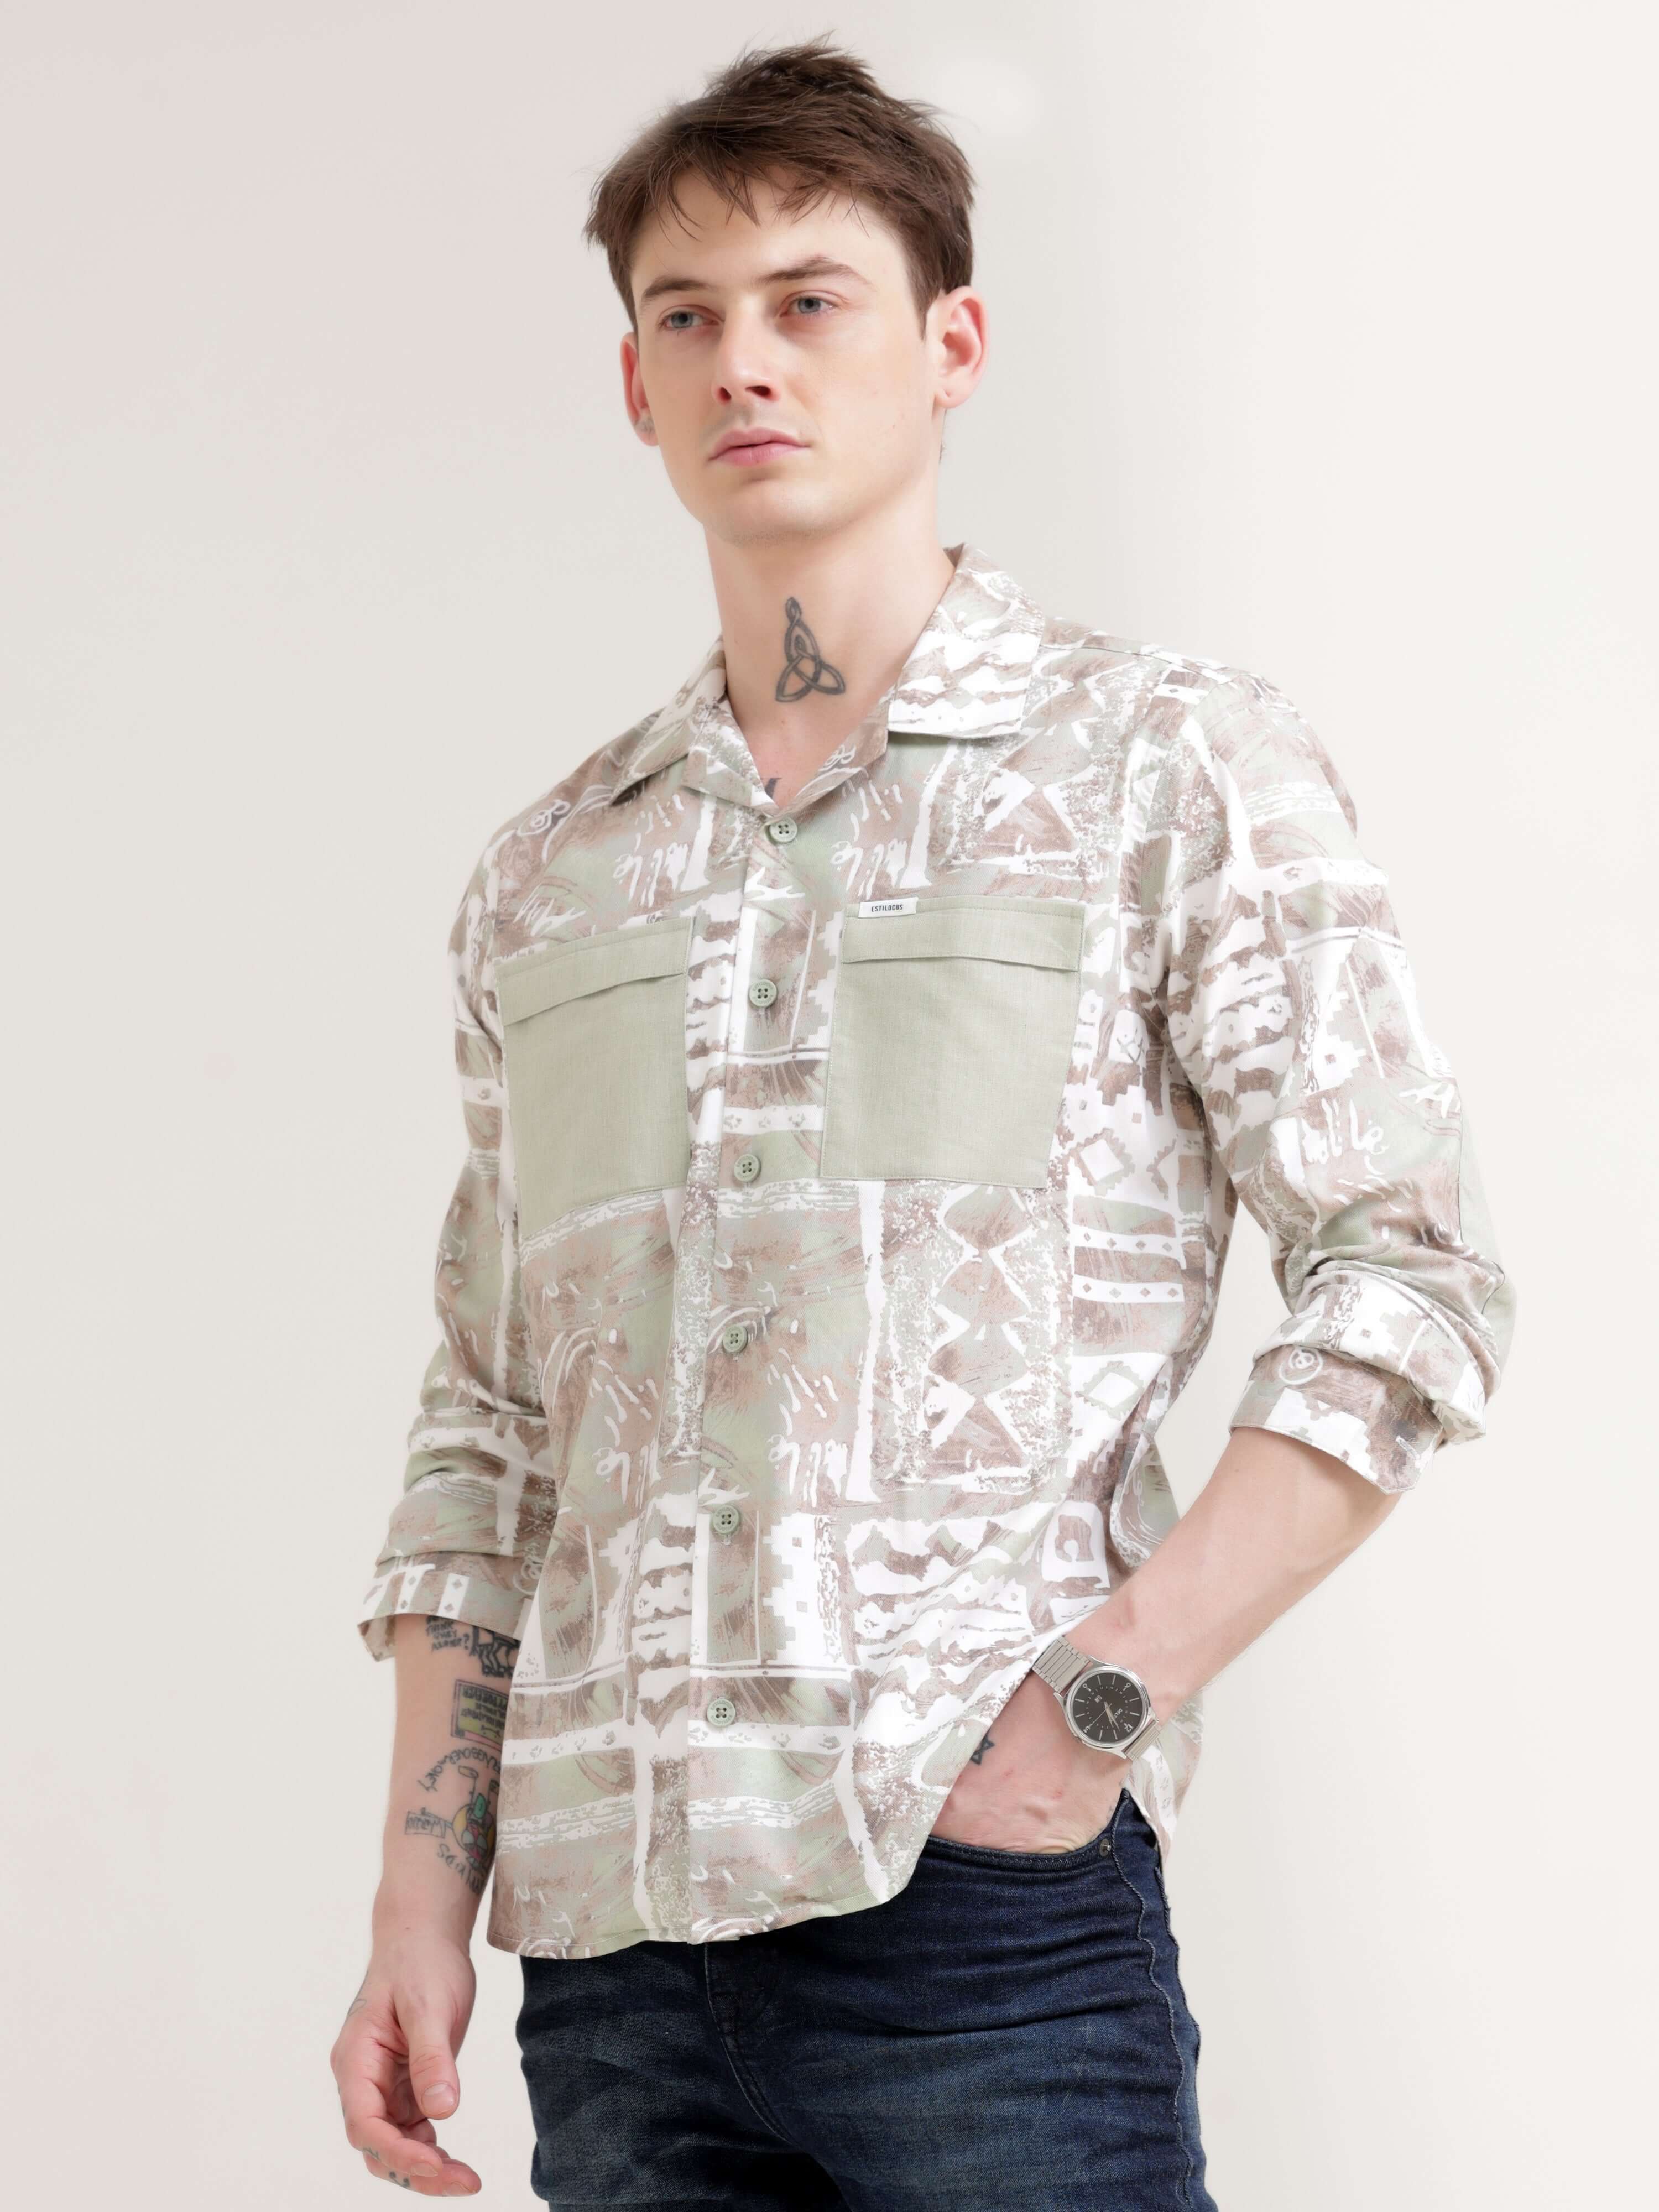 Duval brown abstract print shirt - Men's Casual Wear shop online at Estilocus. Get noticed in our Duval brown abstract print shirt, crafted for comfort & unique style. Perfect for adding a modern twist to any look.